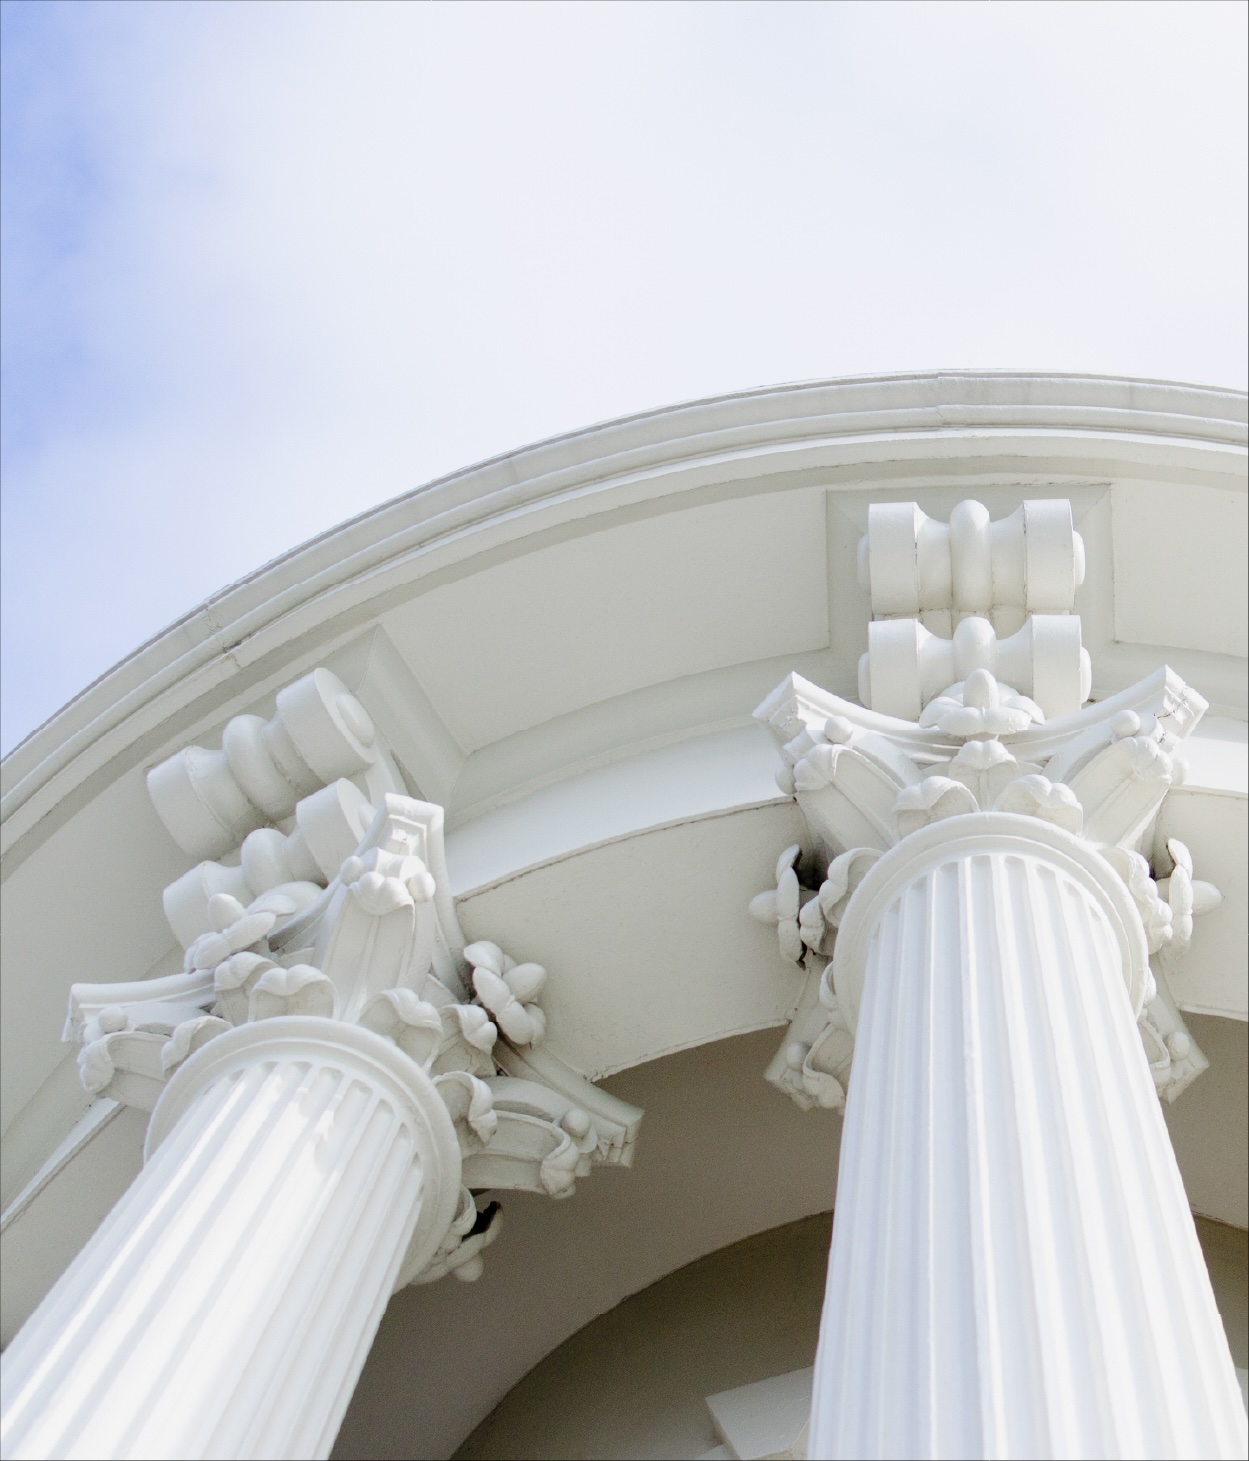 Neoclassical columns supporting the entryway into a US government building